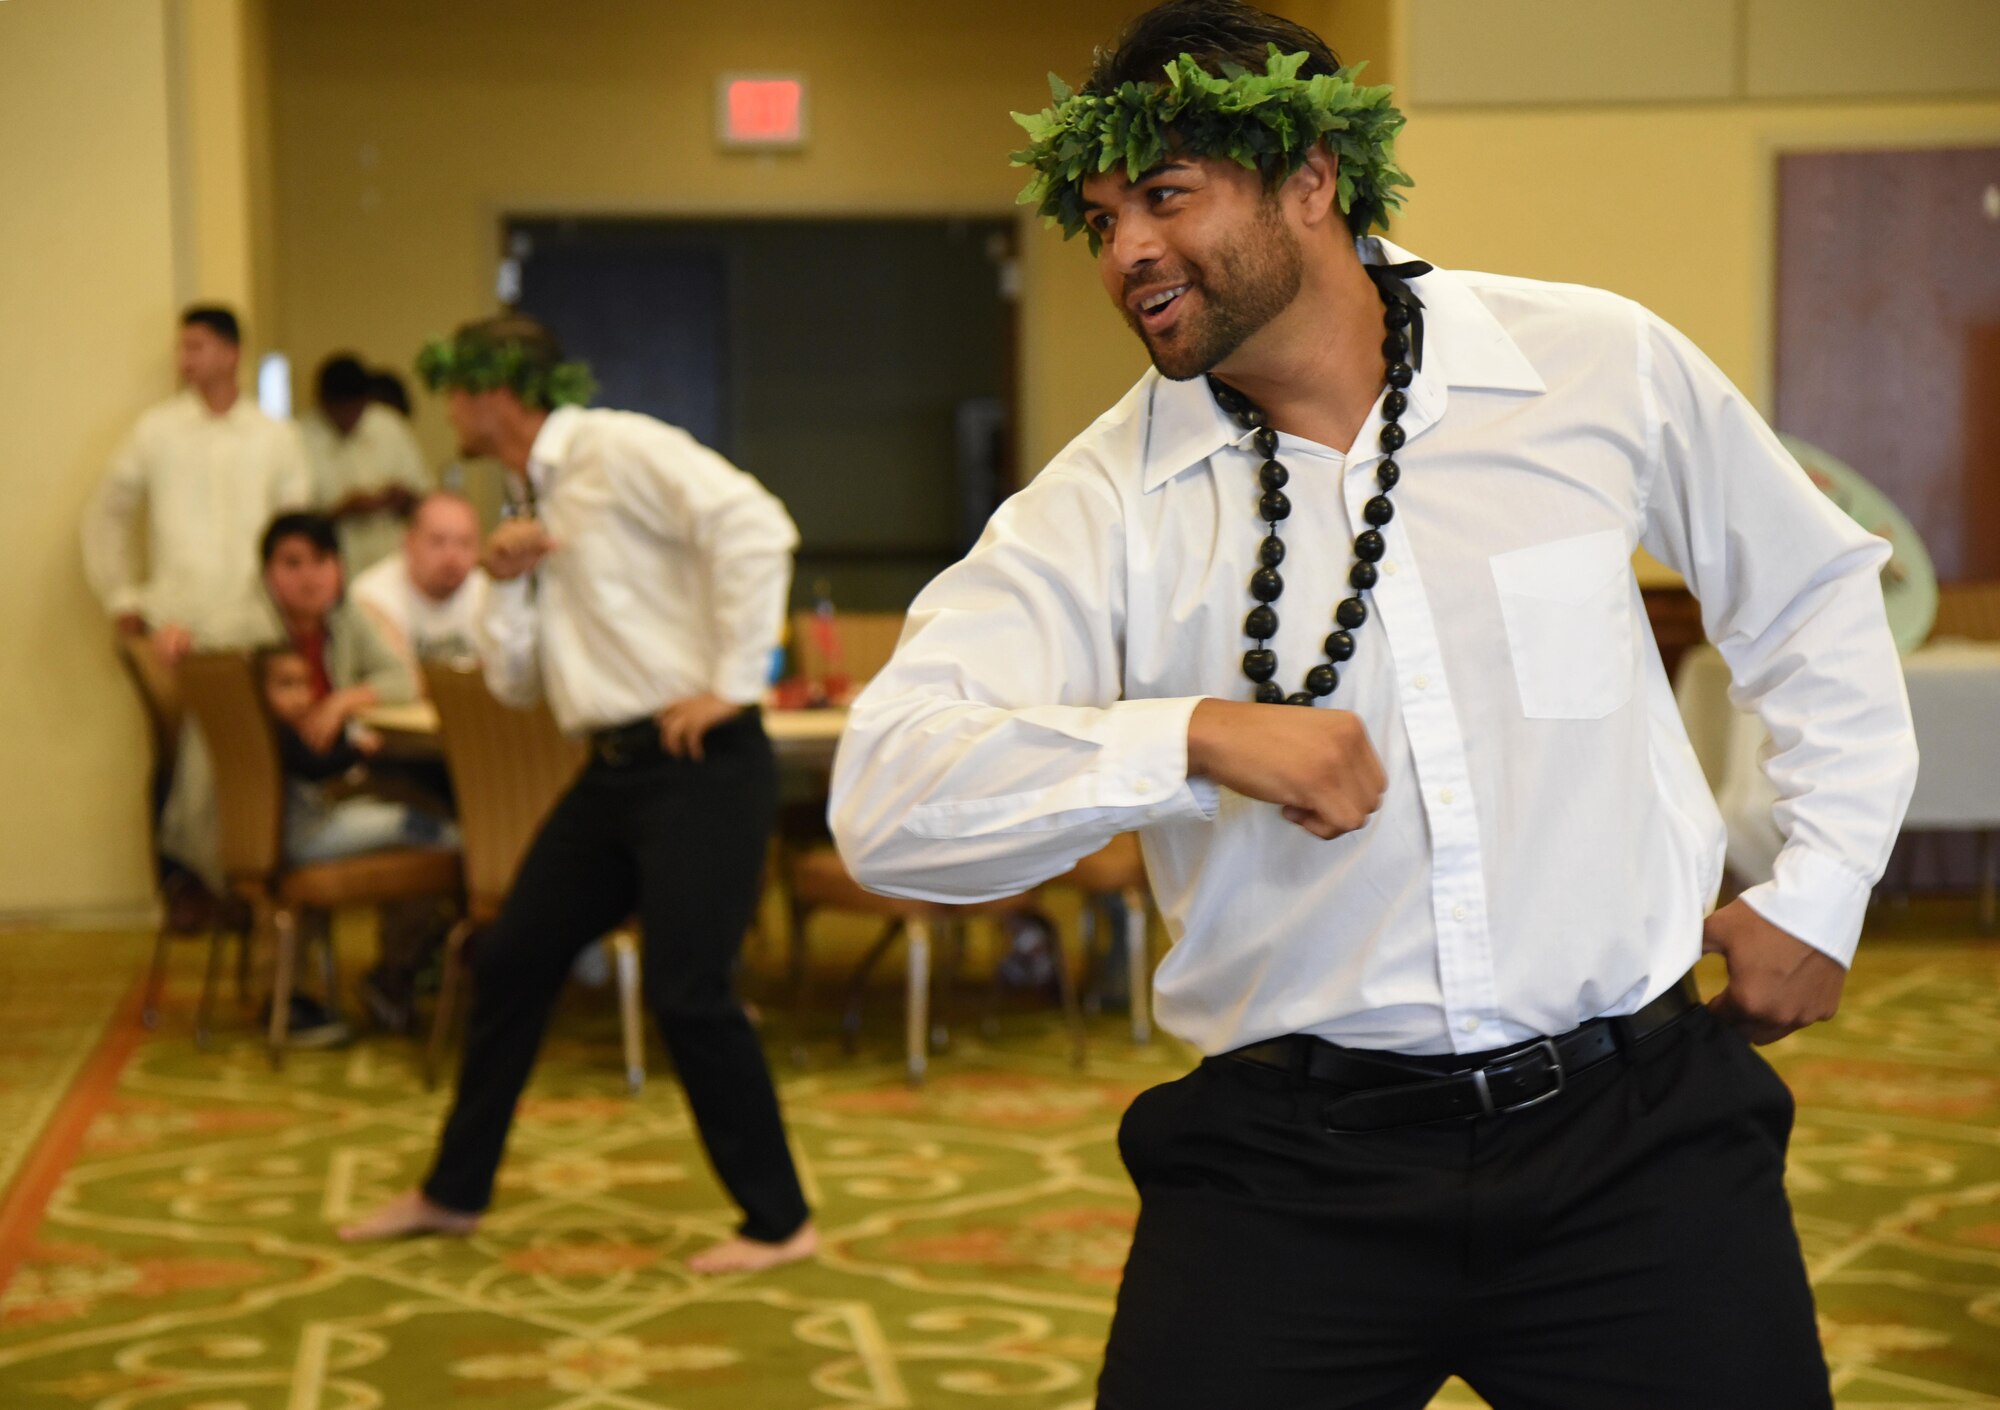 Tech. Sgt. Justin King, 81st Infrastructure Division firefighter, performs a Western-influenced dance during the Asian American and Pacific Islander heritage event at the Bay Breeze Event Center May 24, 2017, on Keesler Air Force Base, Miss. The event, held in recognition of AAPI Heritage Month, displayed various traditional foods for sampling from several Asian and Pacific Islands, as well as karate and dance demonstrations. (U.S. Air Force photo by Kemberly Groue)